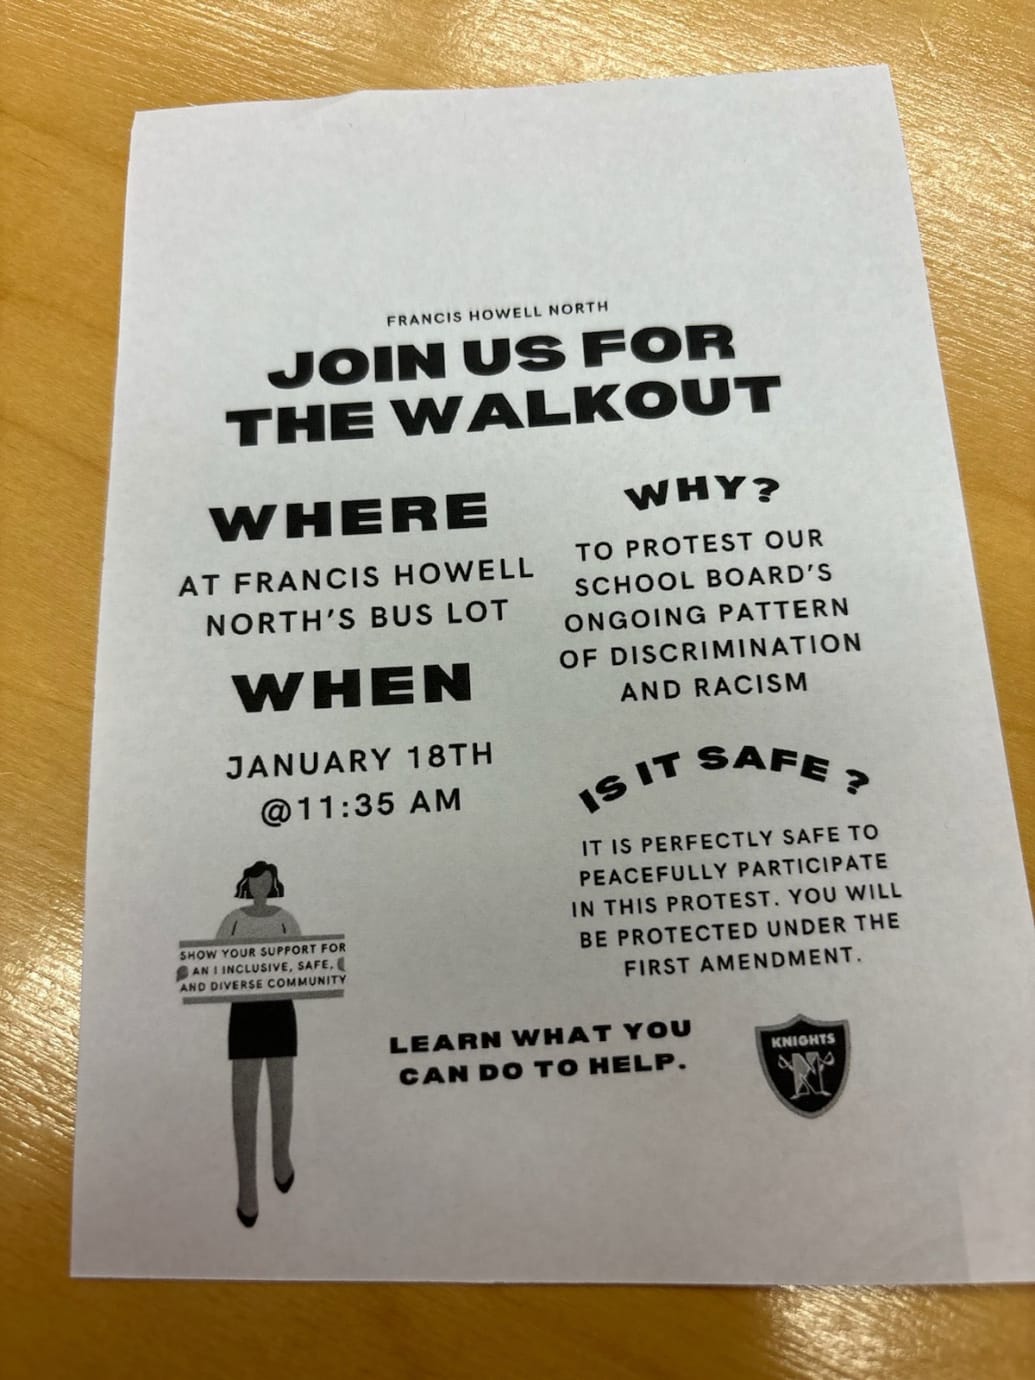 Photograph of a flyer for a walk out protesting the Francis Howell School Board